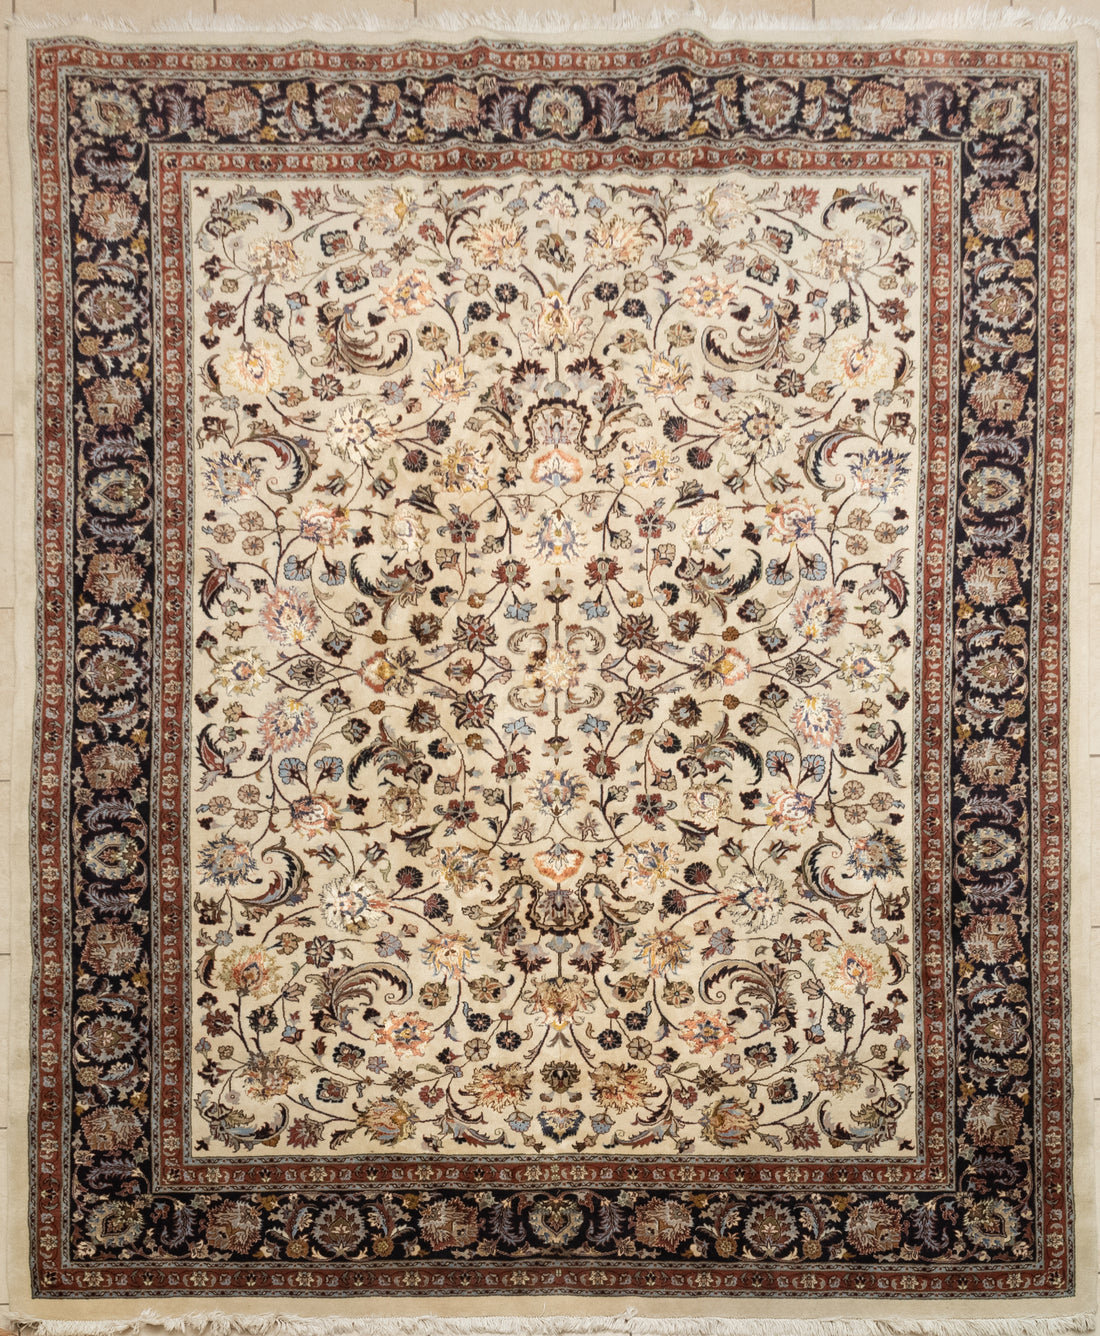 Hand-Knotted Wool Rug 11' x 8'